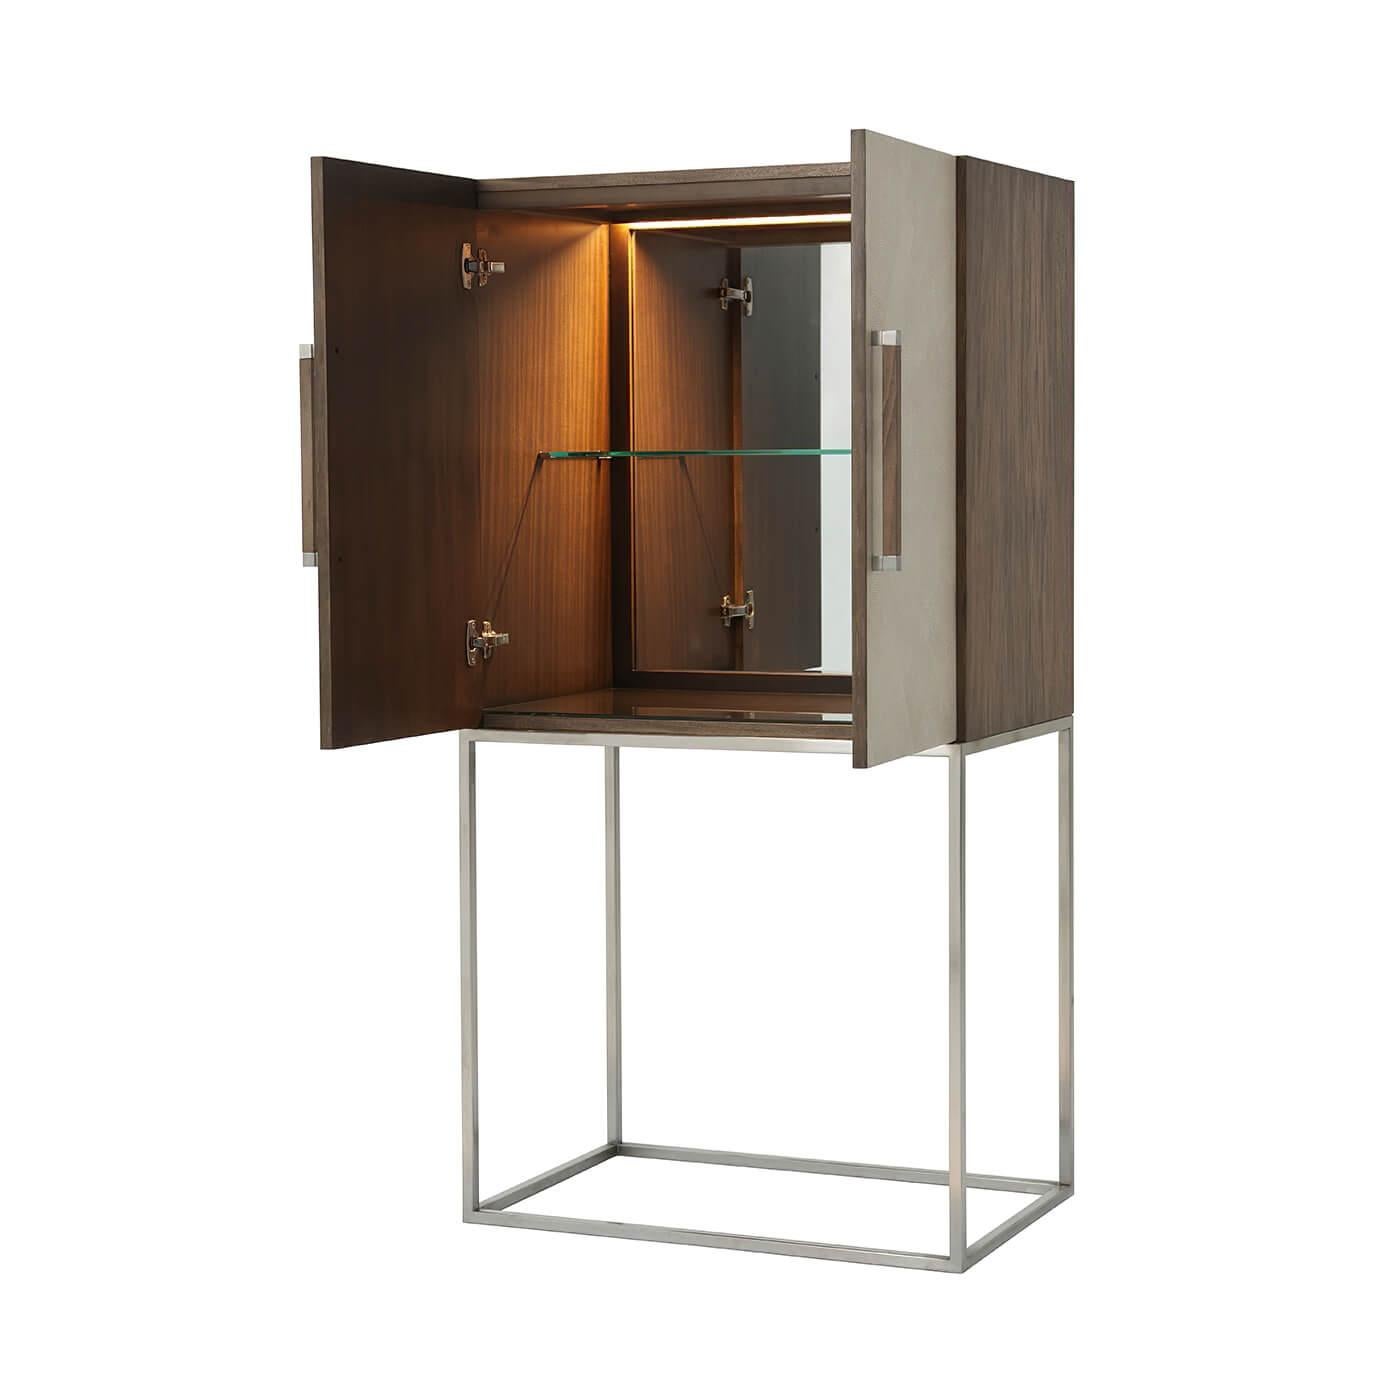 Midcentury style leather-wrapped bar cabinet with a primavera veneered case in our mangrove finish with overcast finish starburst komoda embossed leather doors, with square baton handles with polished nickel finish clasps, polished nickel finish